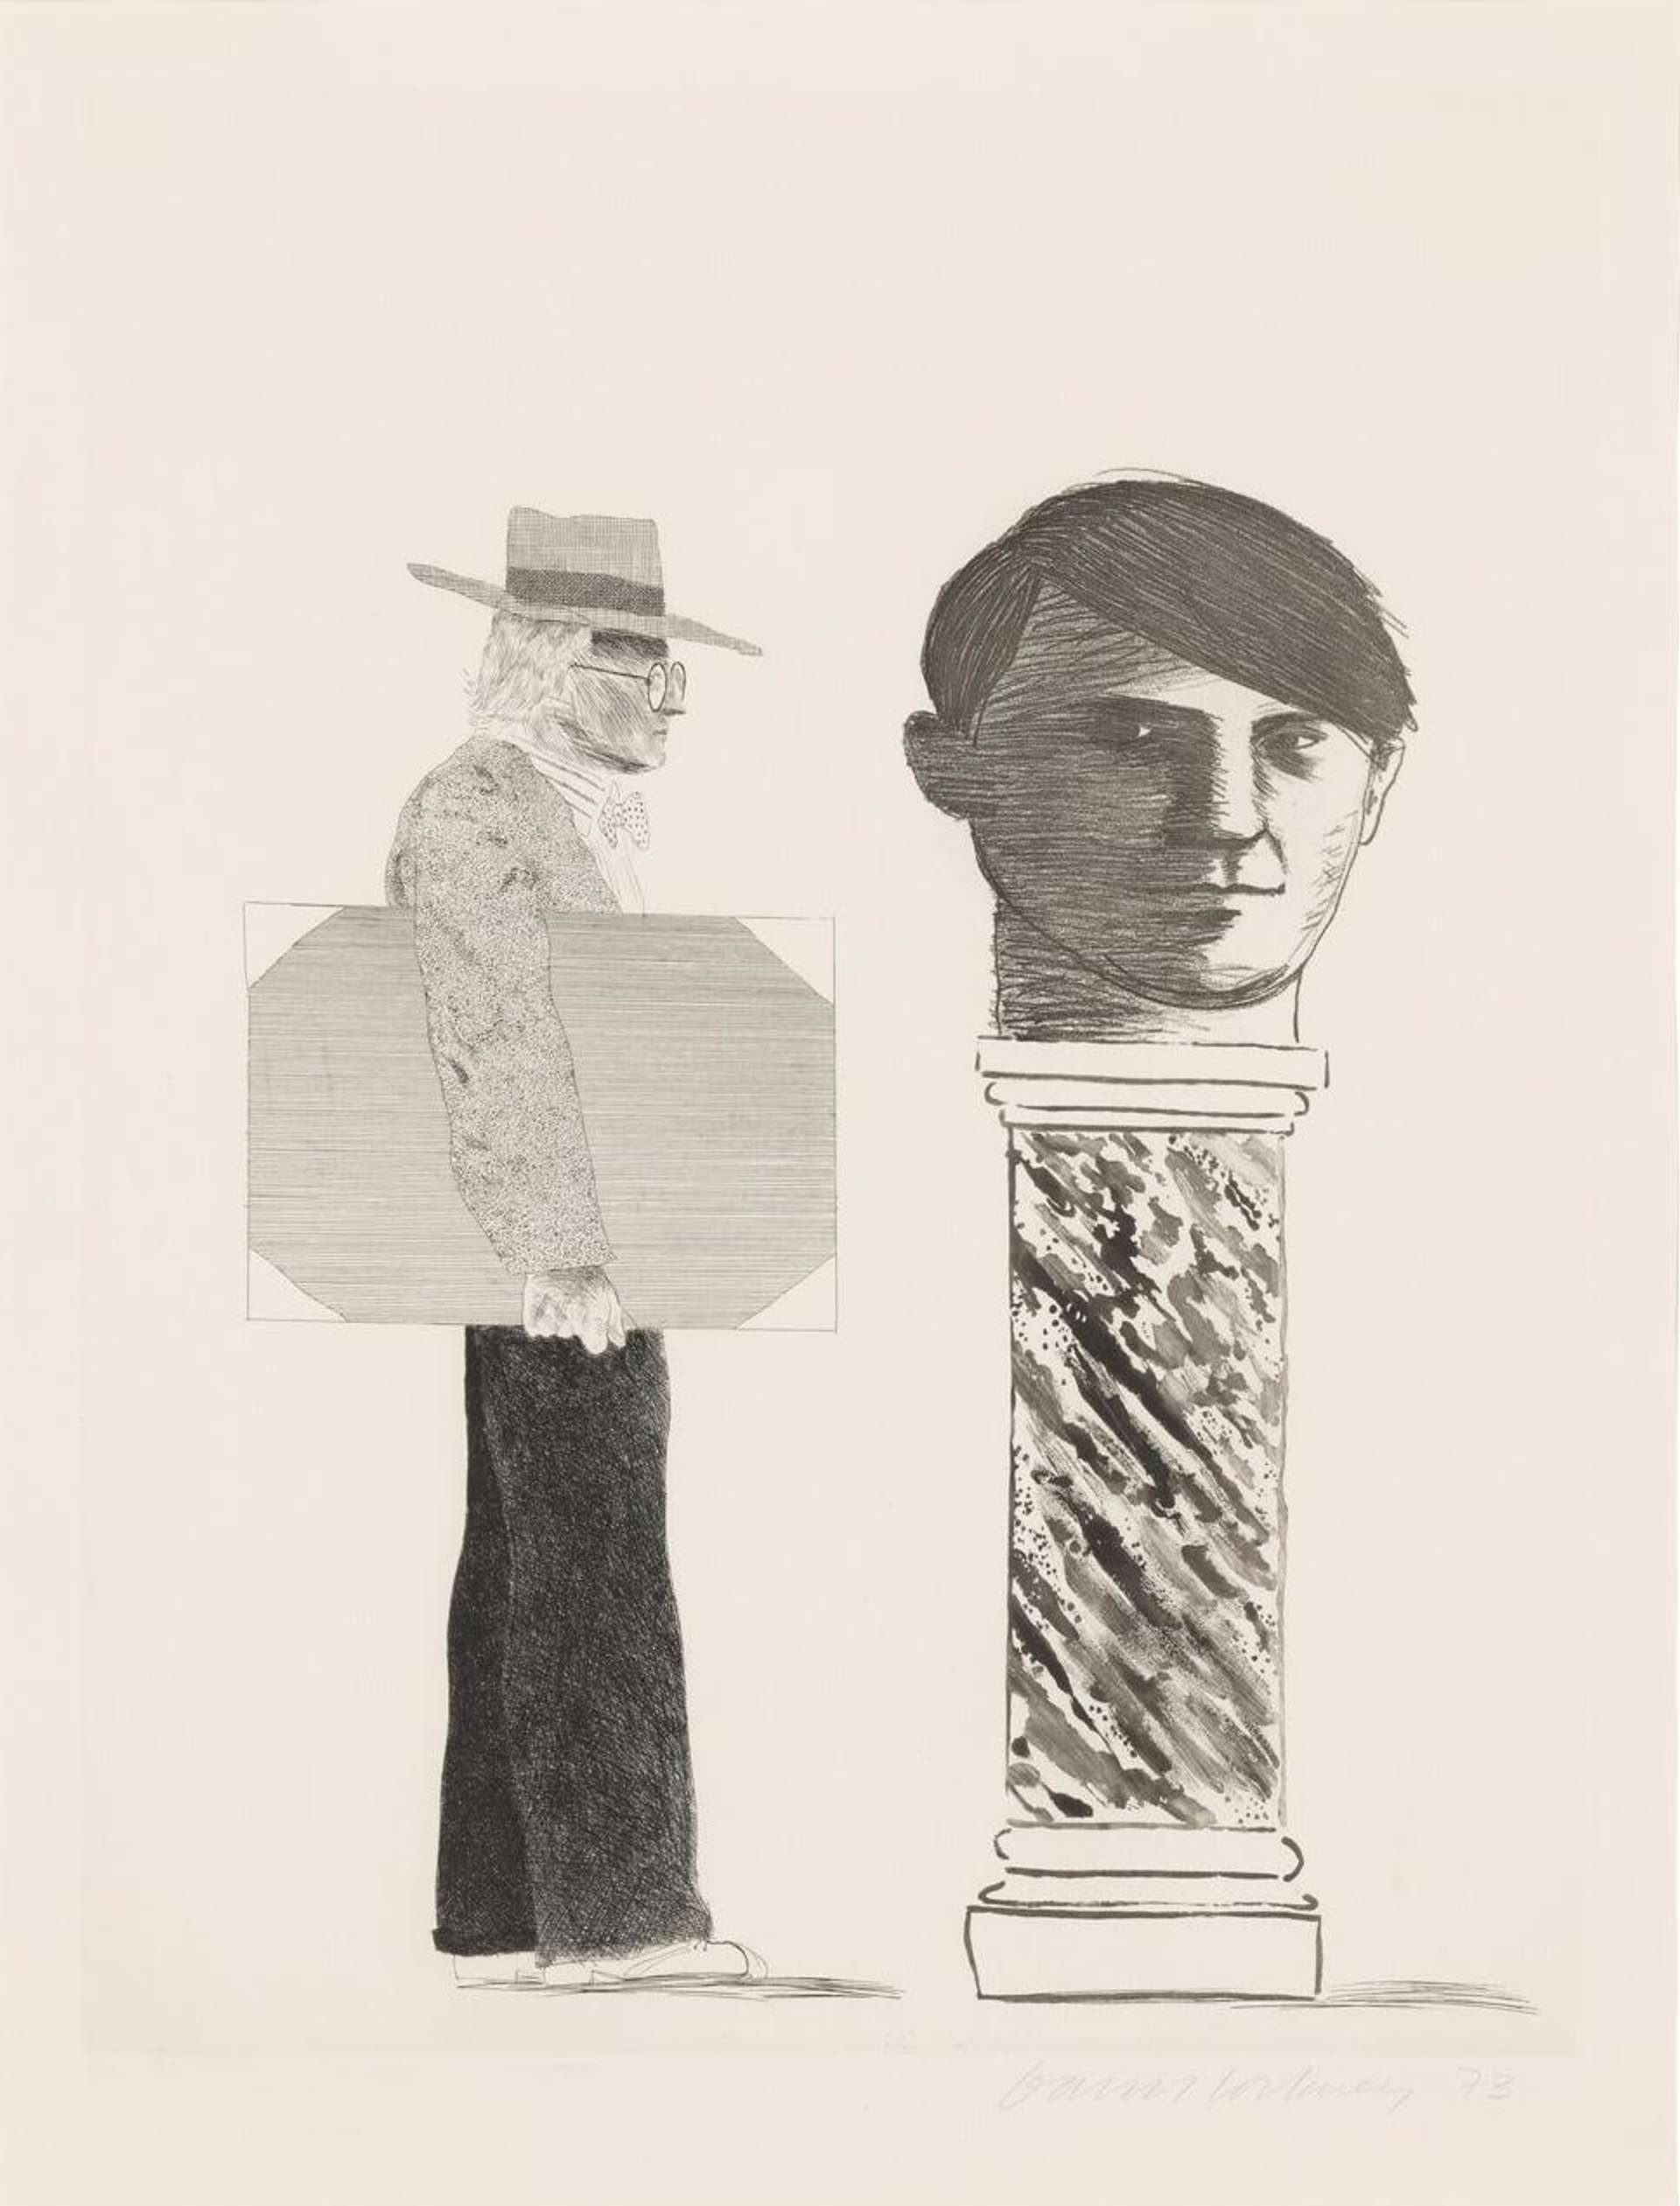 This print depicts Hockney standing next to a bust of his idol, positioned on an ornate marble plinth. It is done in a monochrome colour palette.